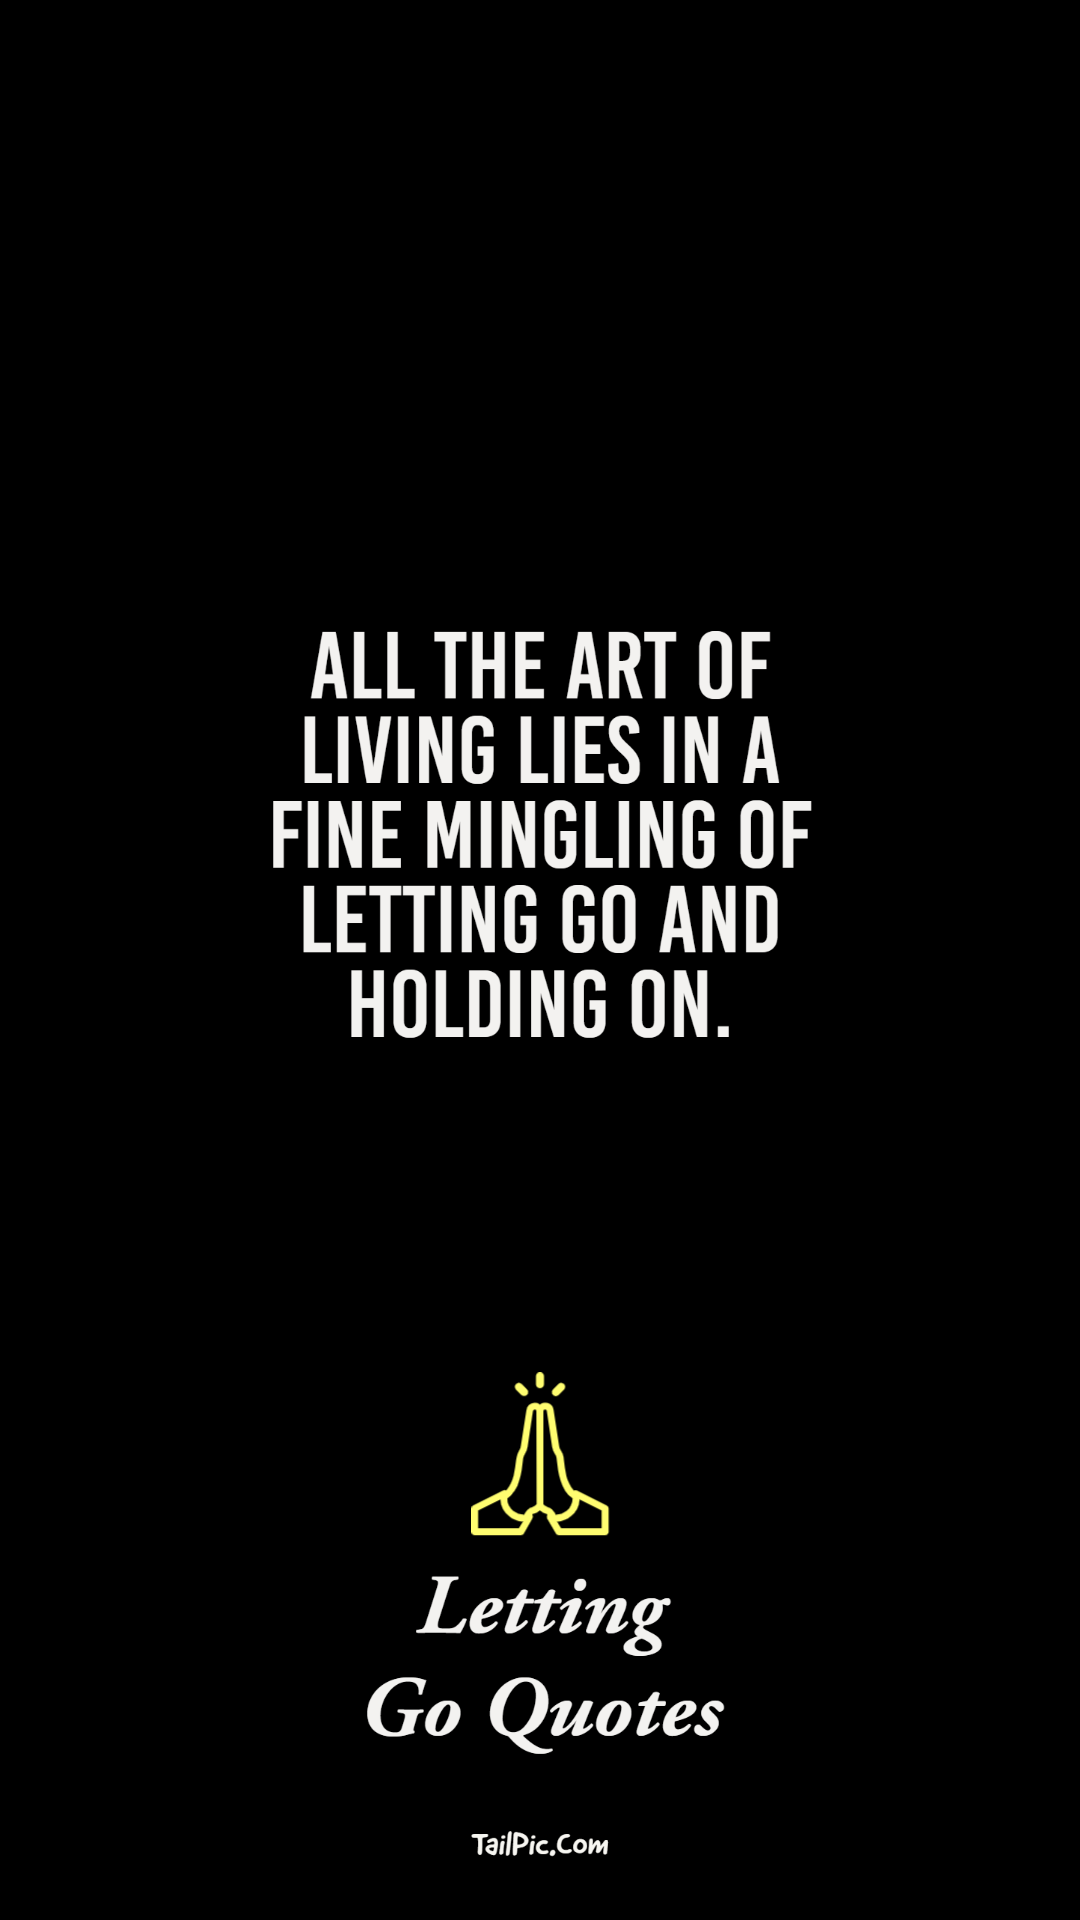 letting go quotes for moving on with your life